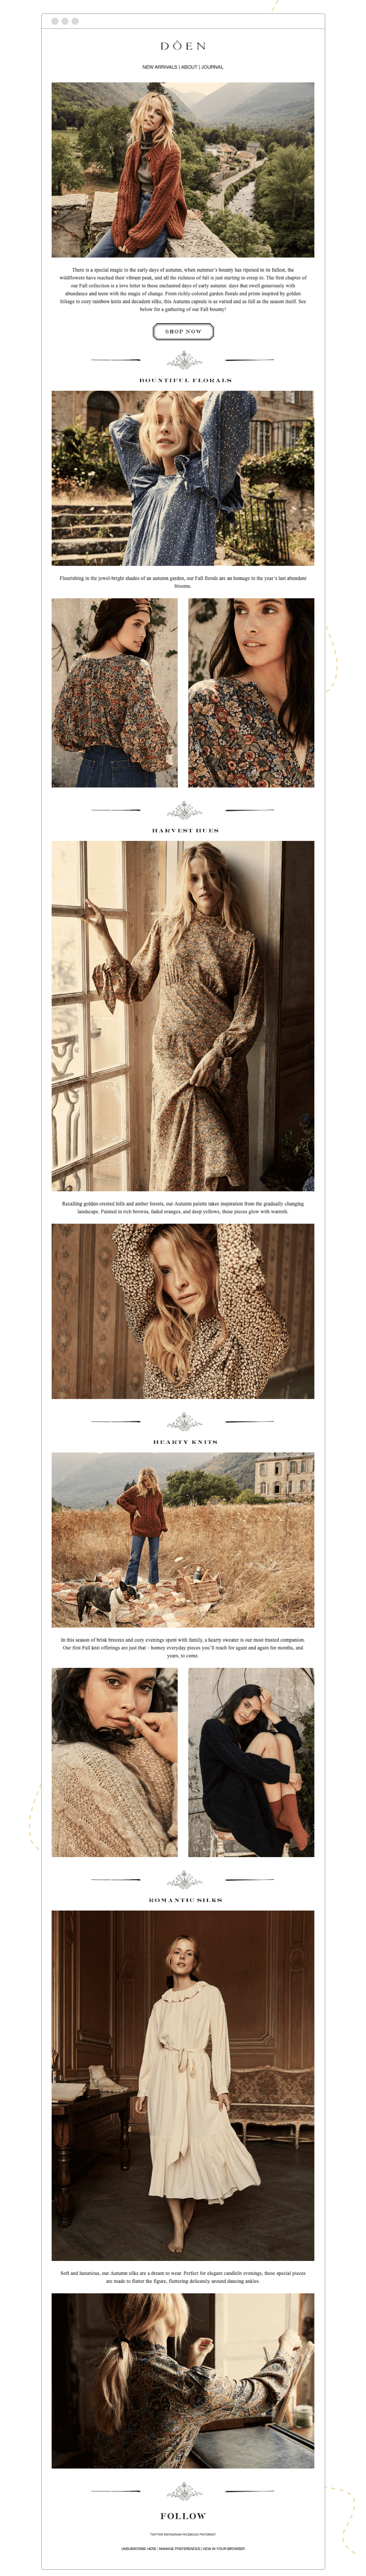 Hive.co_Email_Marketing_Fashion_Ecommerce_Email_Templates_Do-en-min